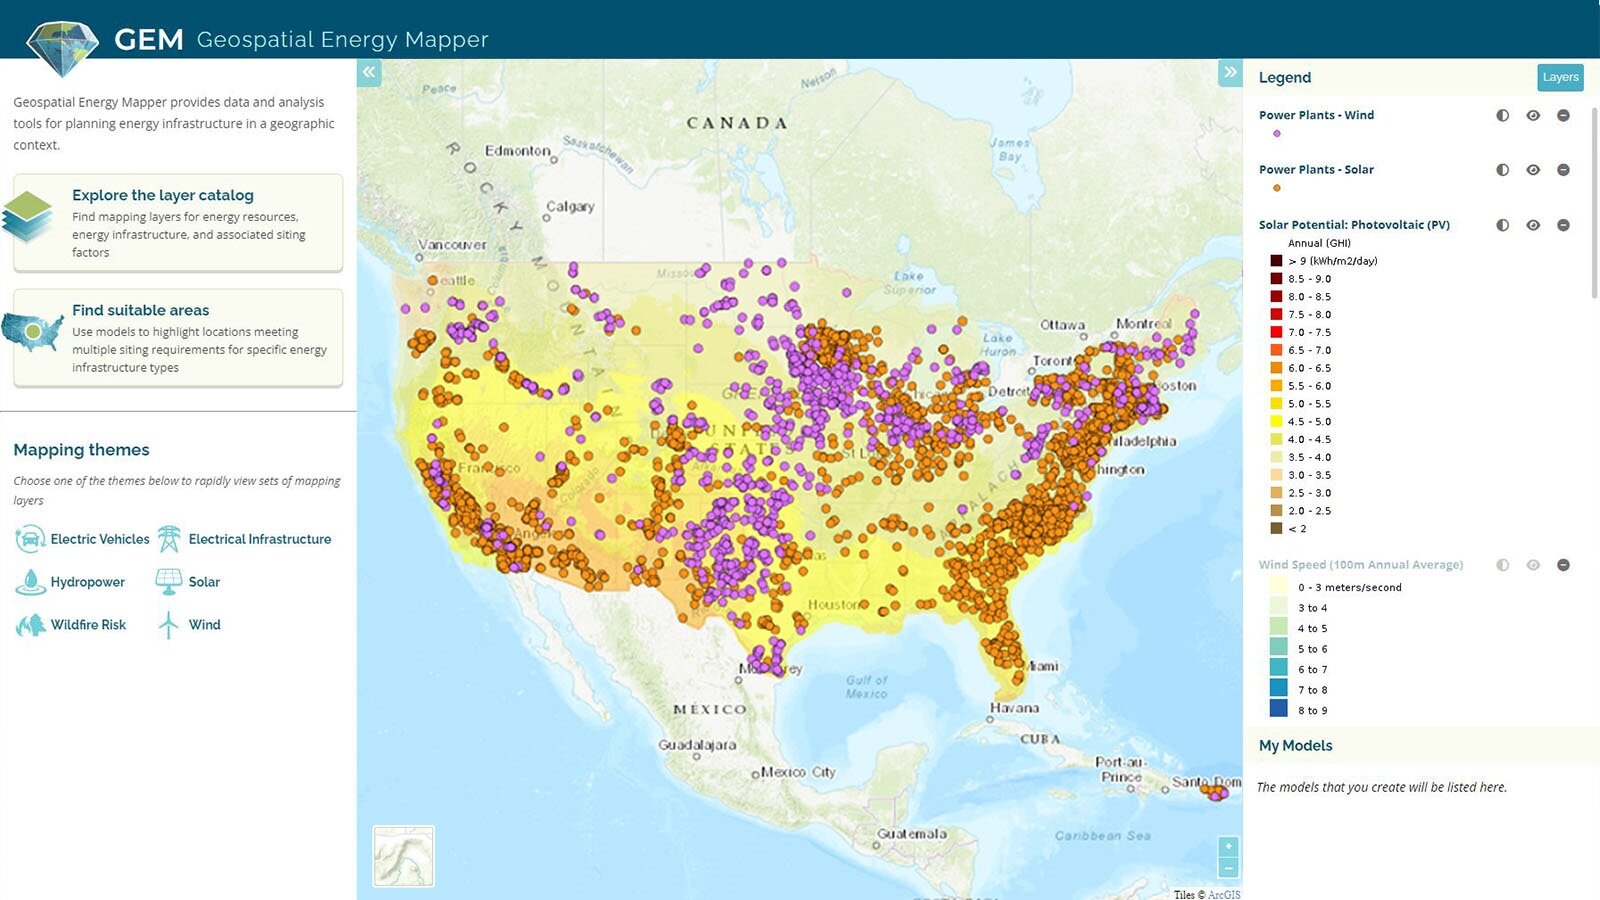 #A new tool helps map out where to develop clean energy infrastructure